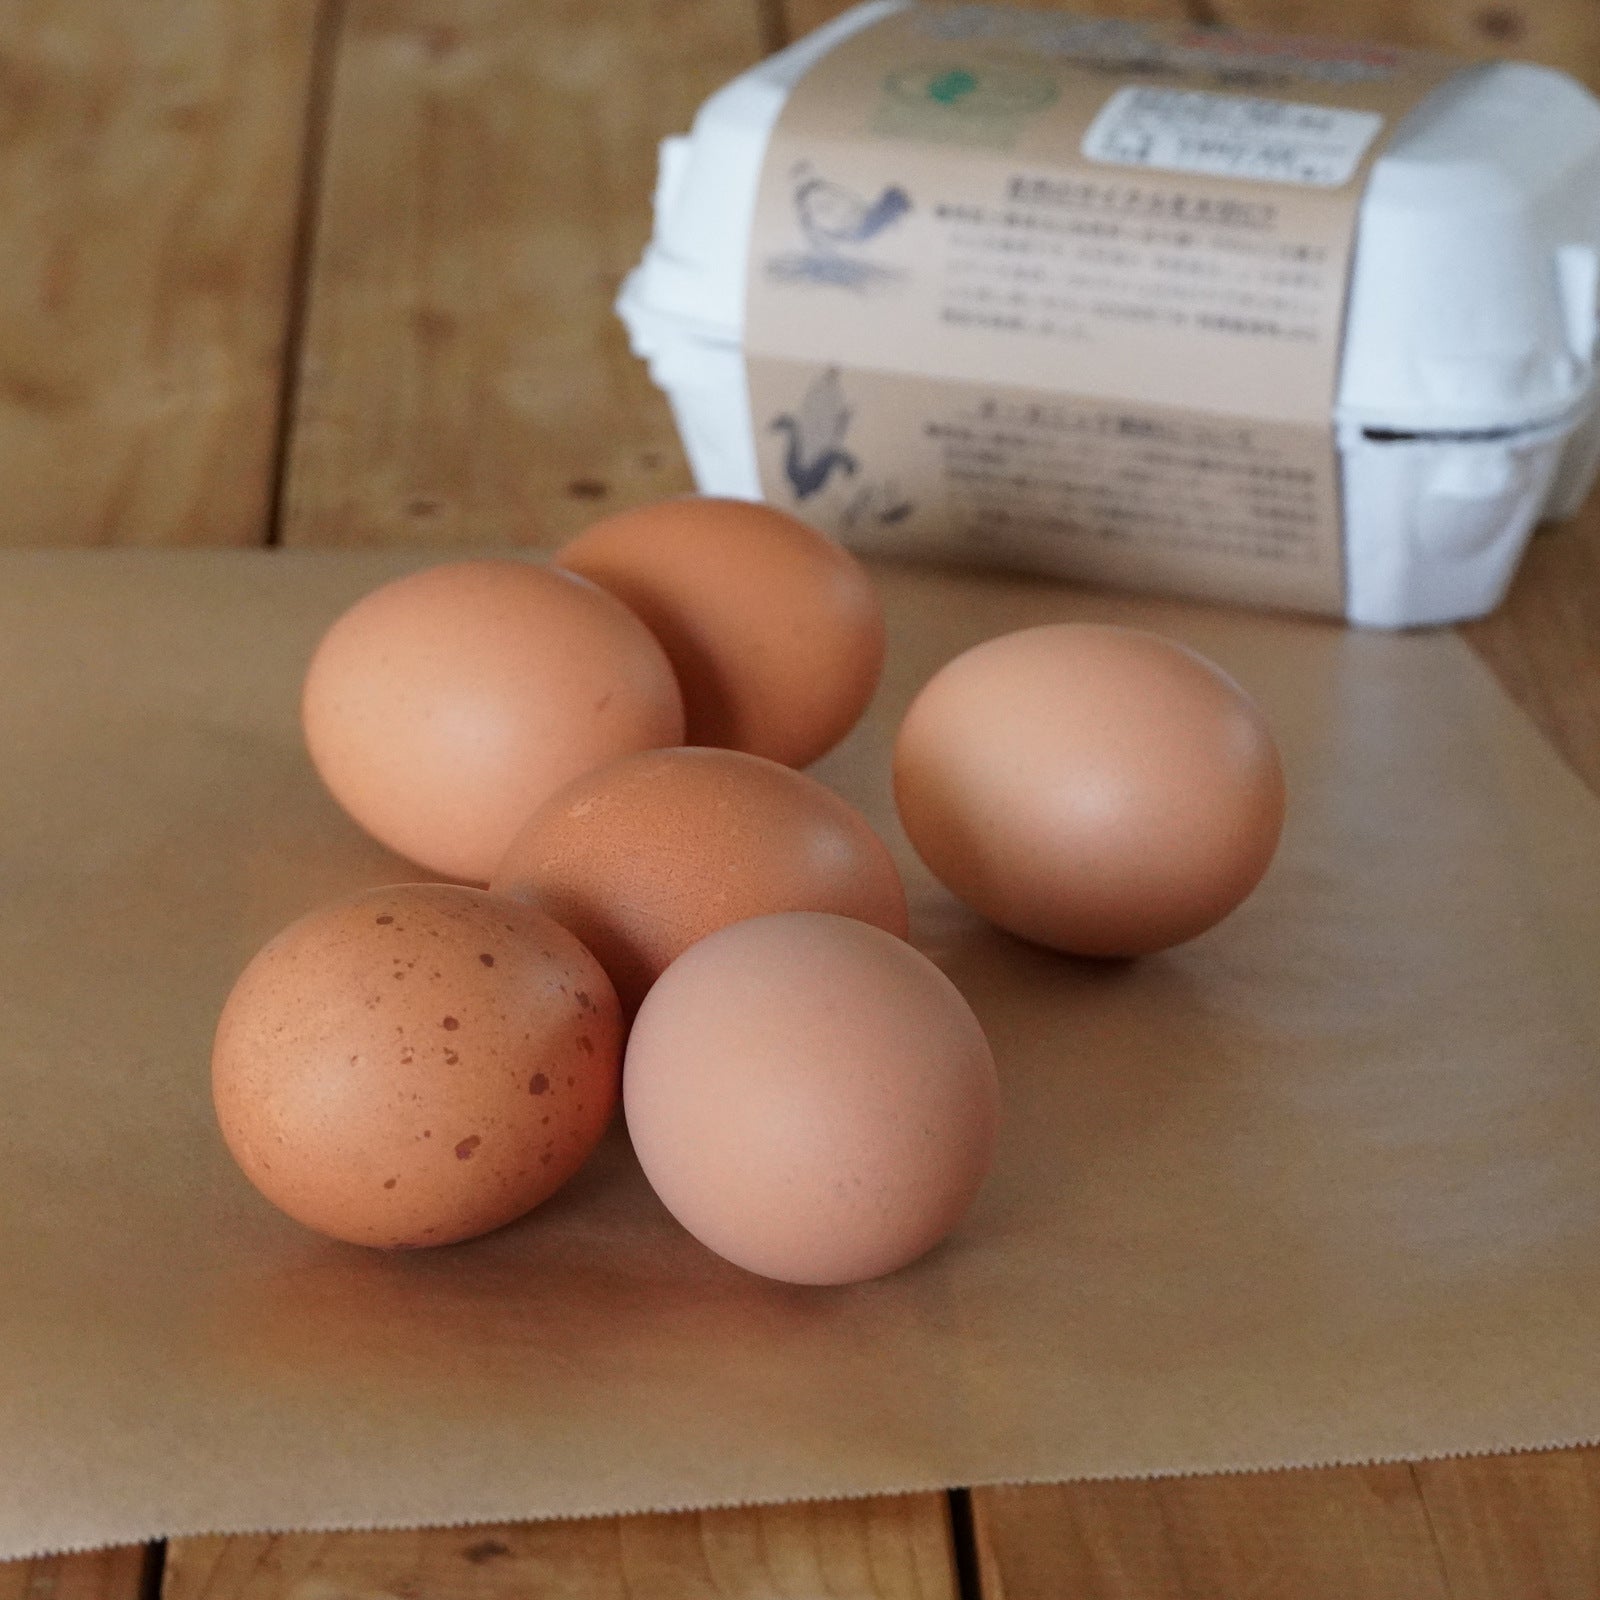 Certified Organic Free-Range Eggs from Japan (12-30 Eggs) (Terms & Conditions Apply) - Horizon Farms